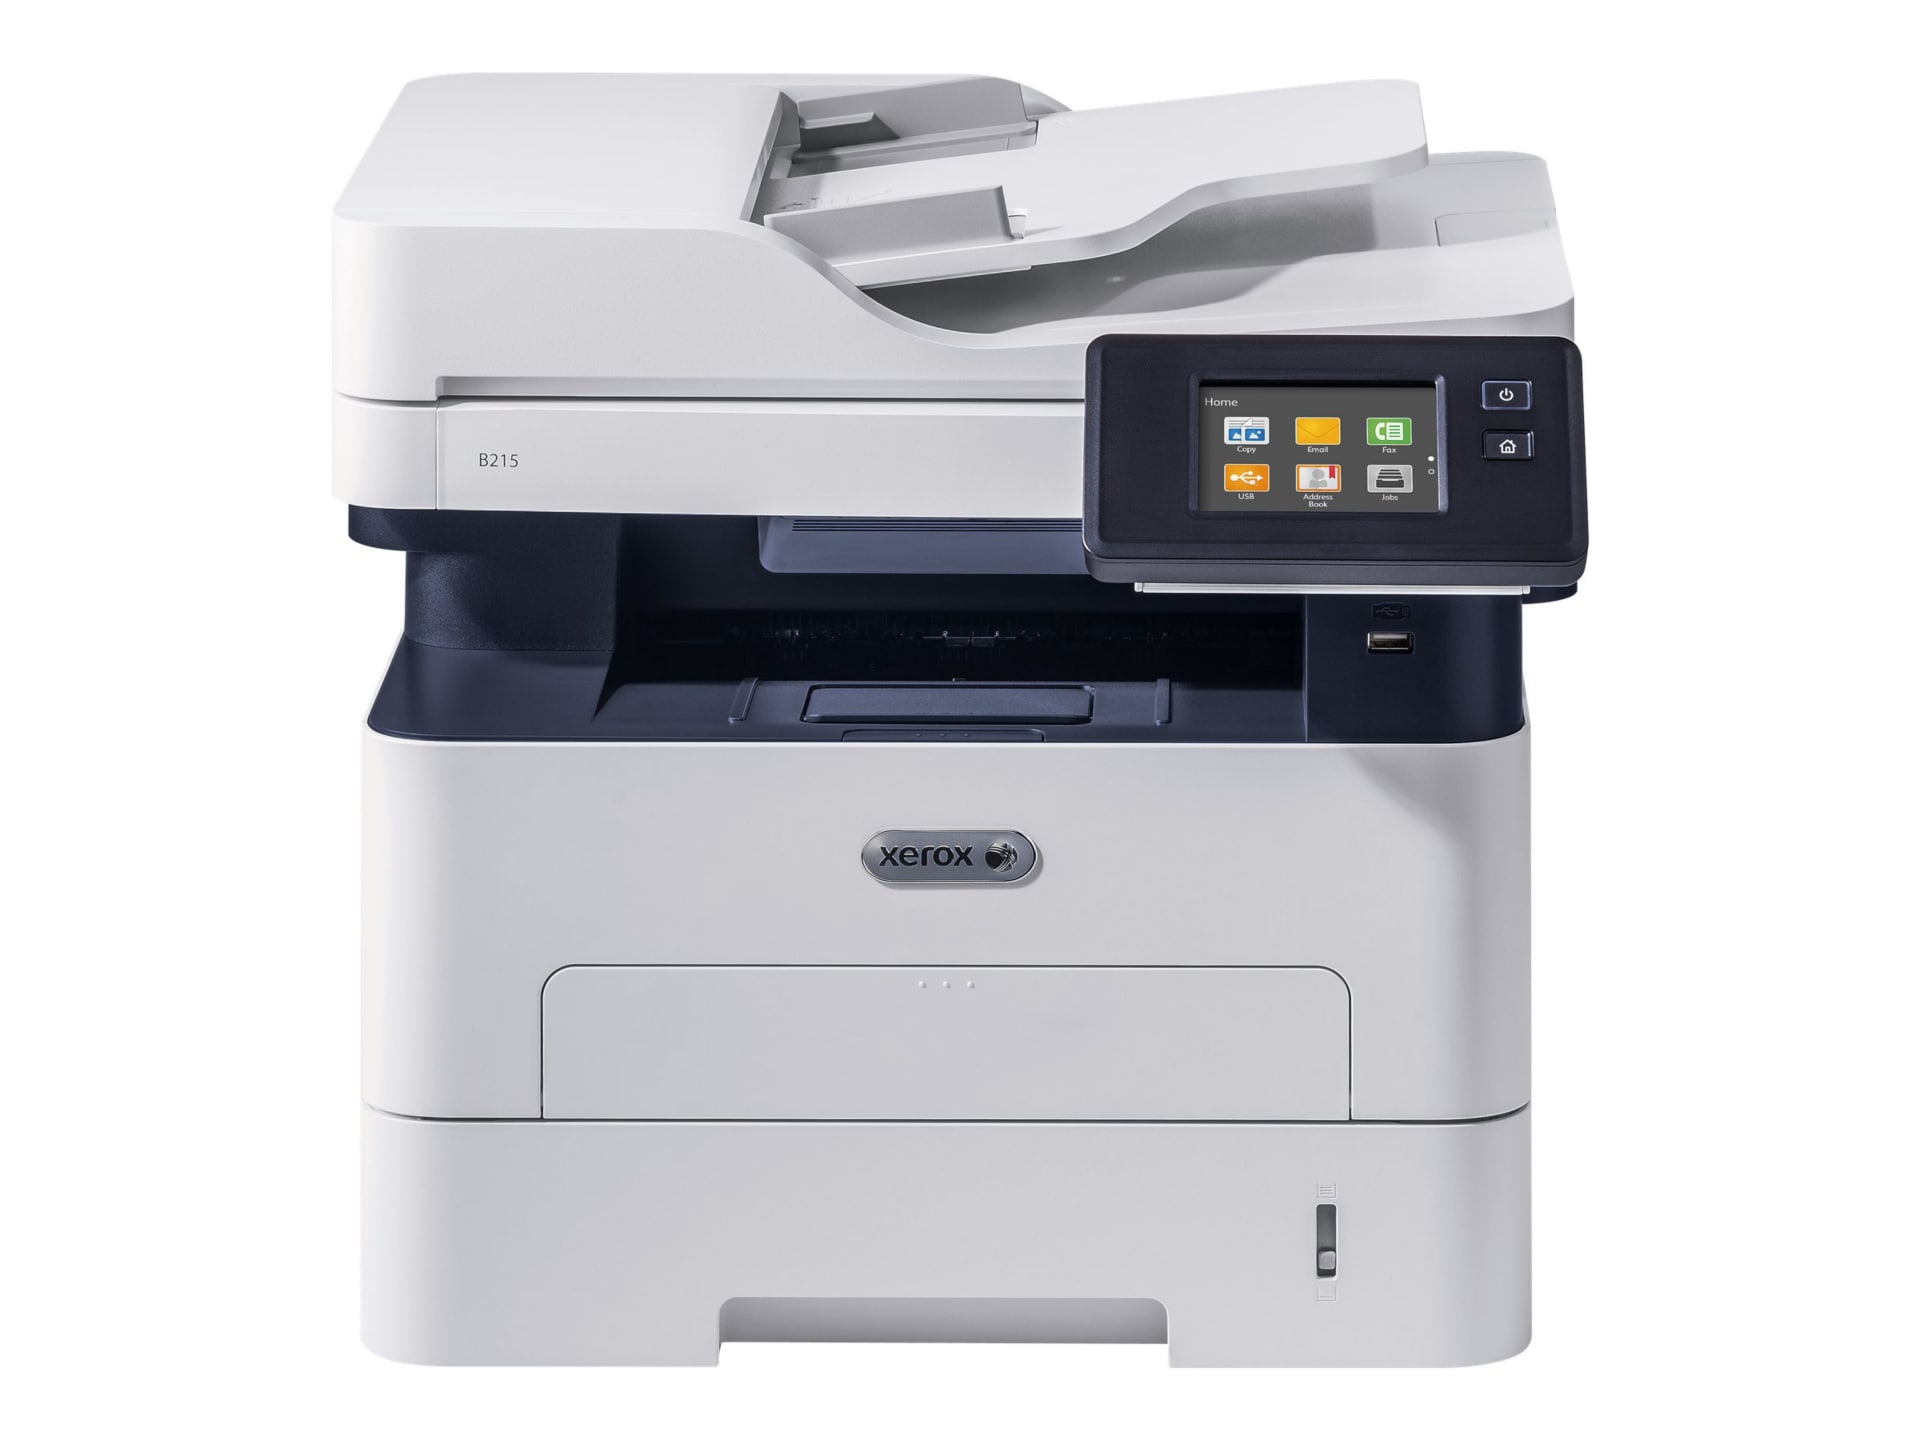 Xerox B215 31 ppm Black and White All-in-One Multifunction Printer